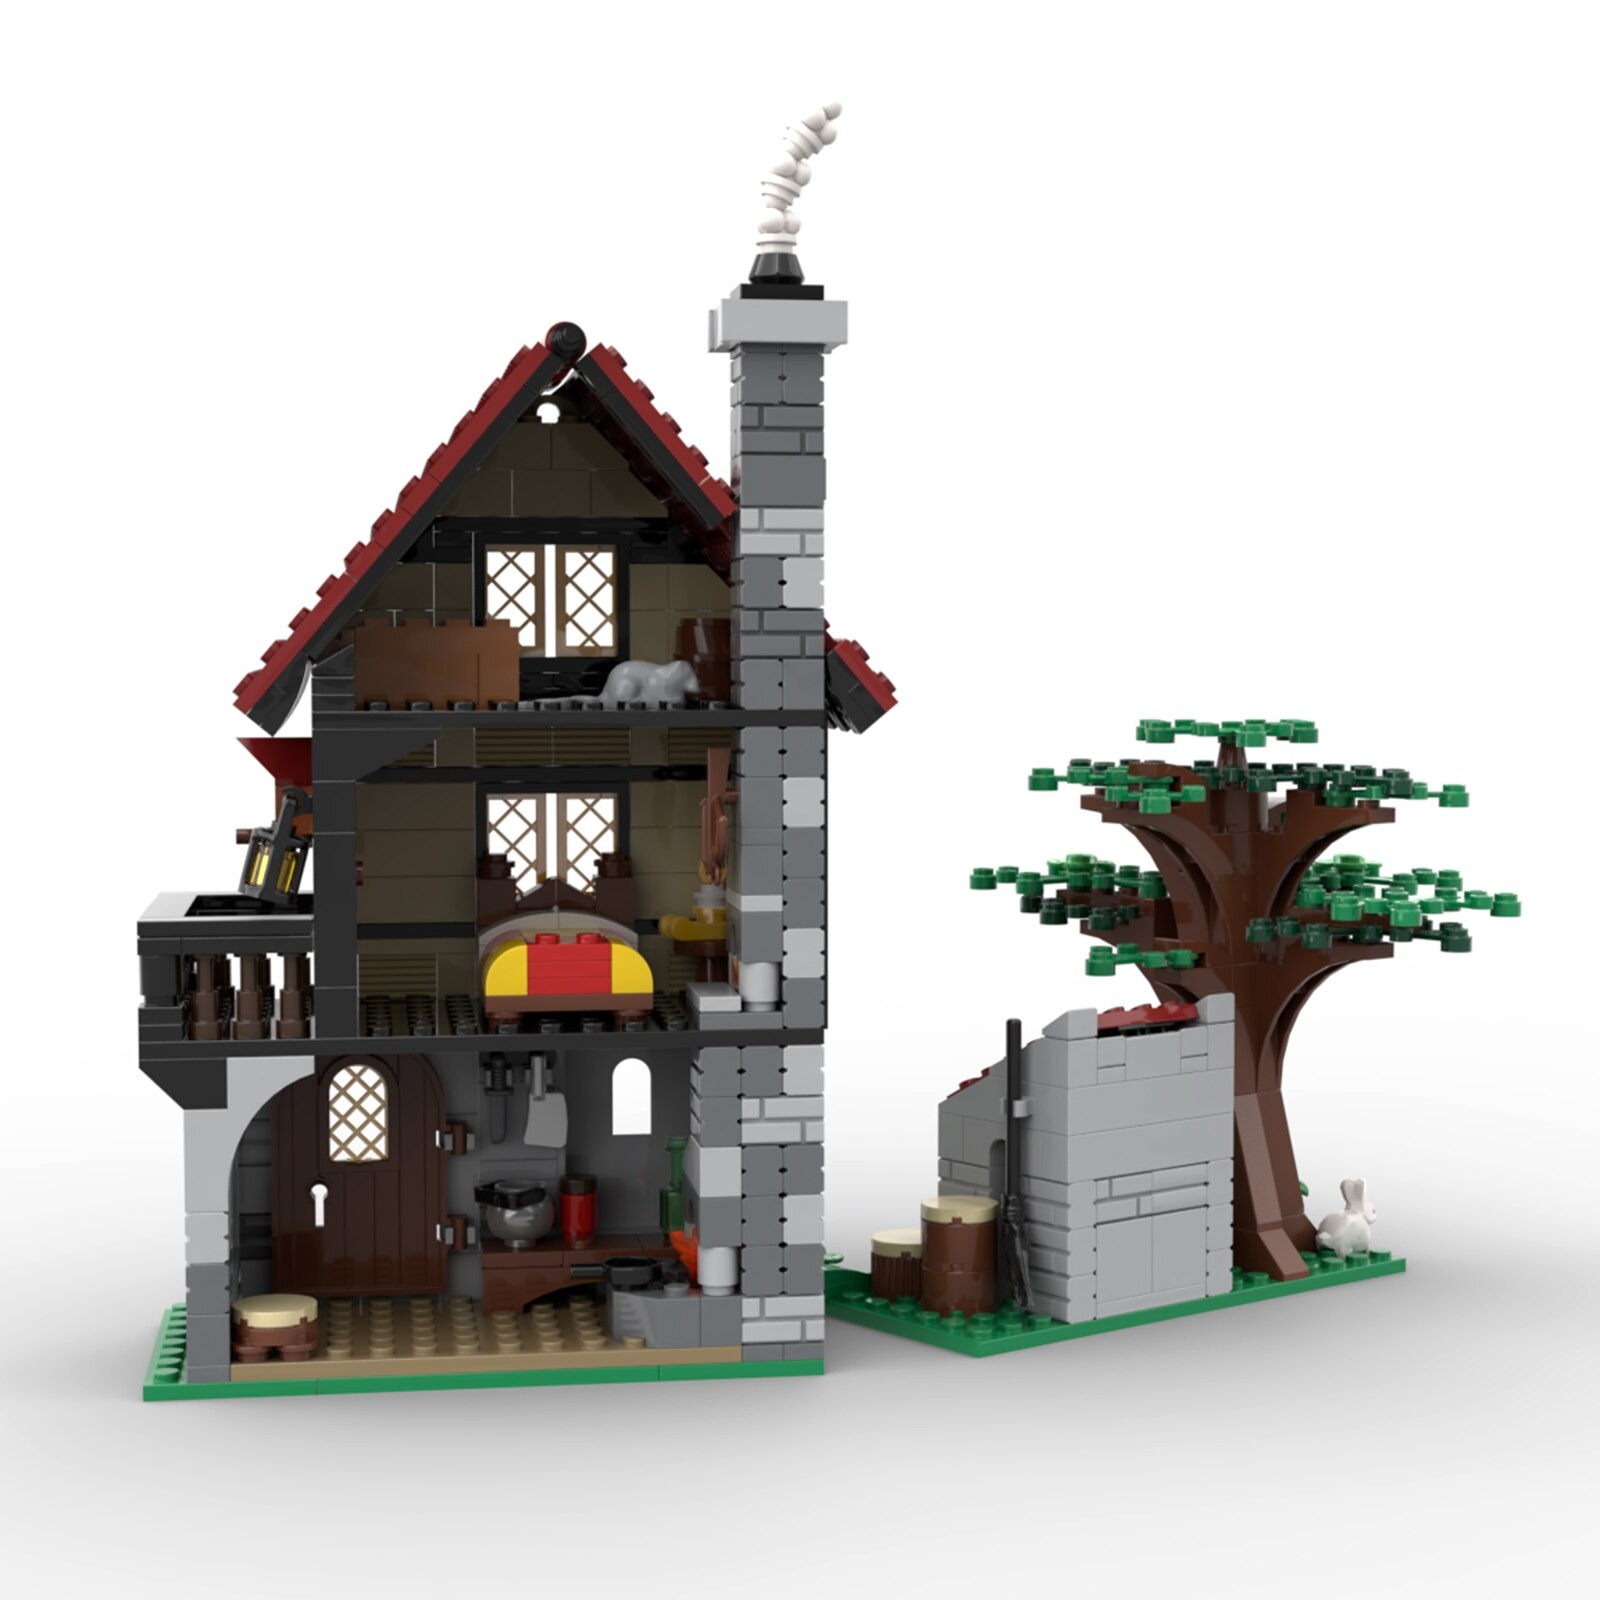 authorized moc 82740 medieval house 524 p main 2 - MOULD KING